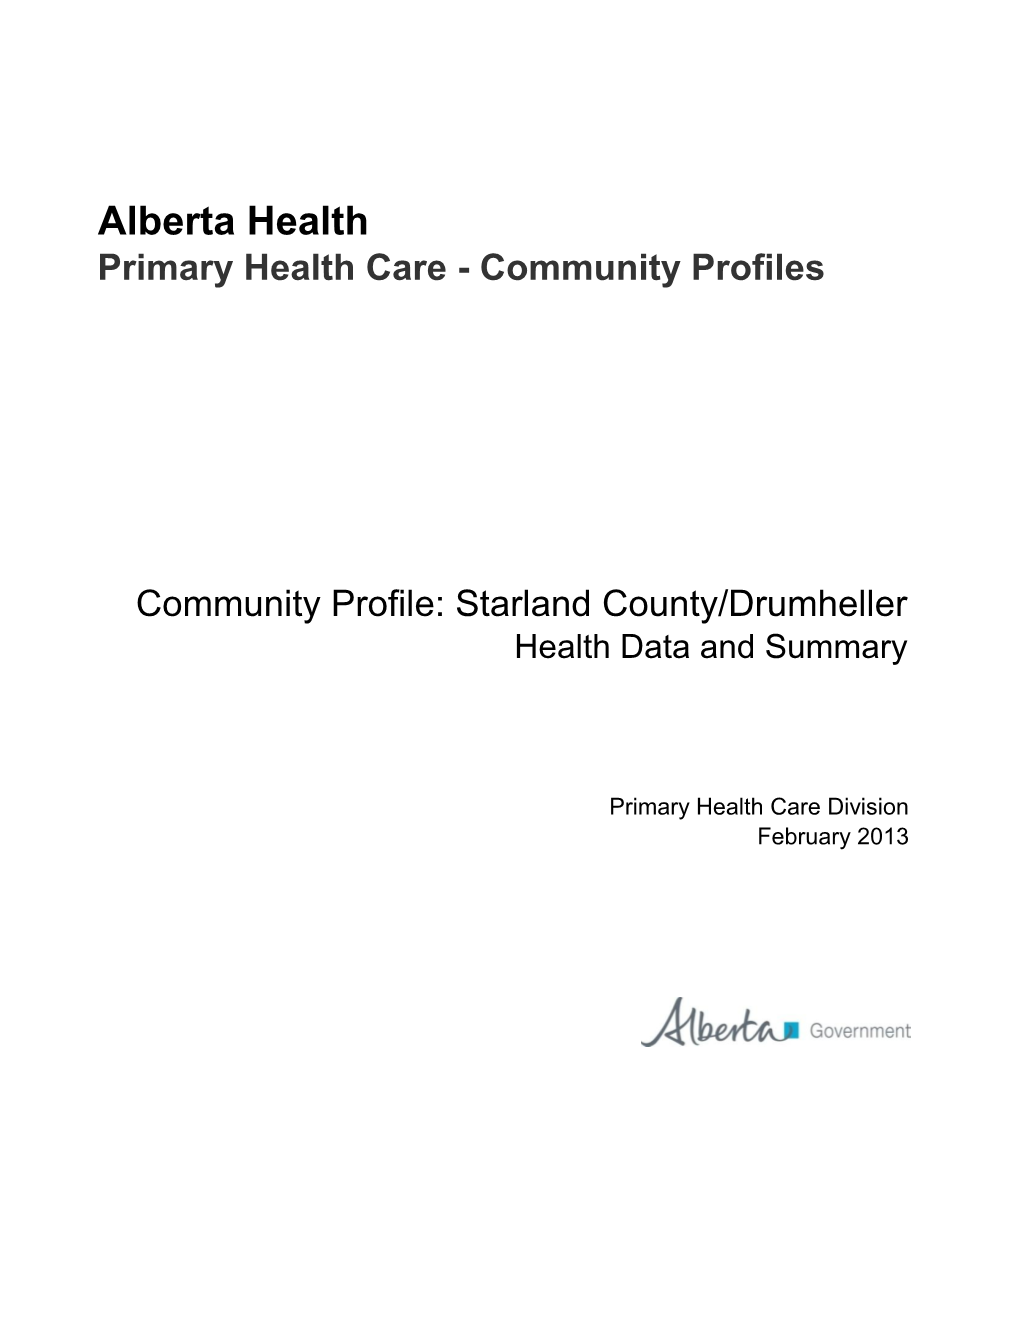 Starland County/Drumheller Health Data and Summary